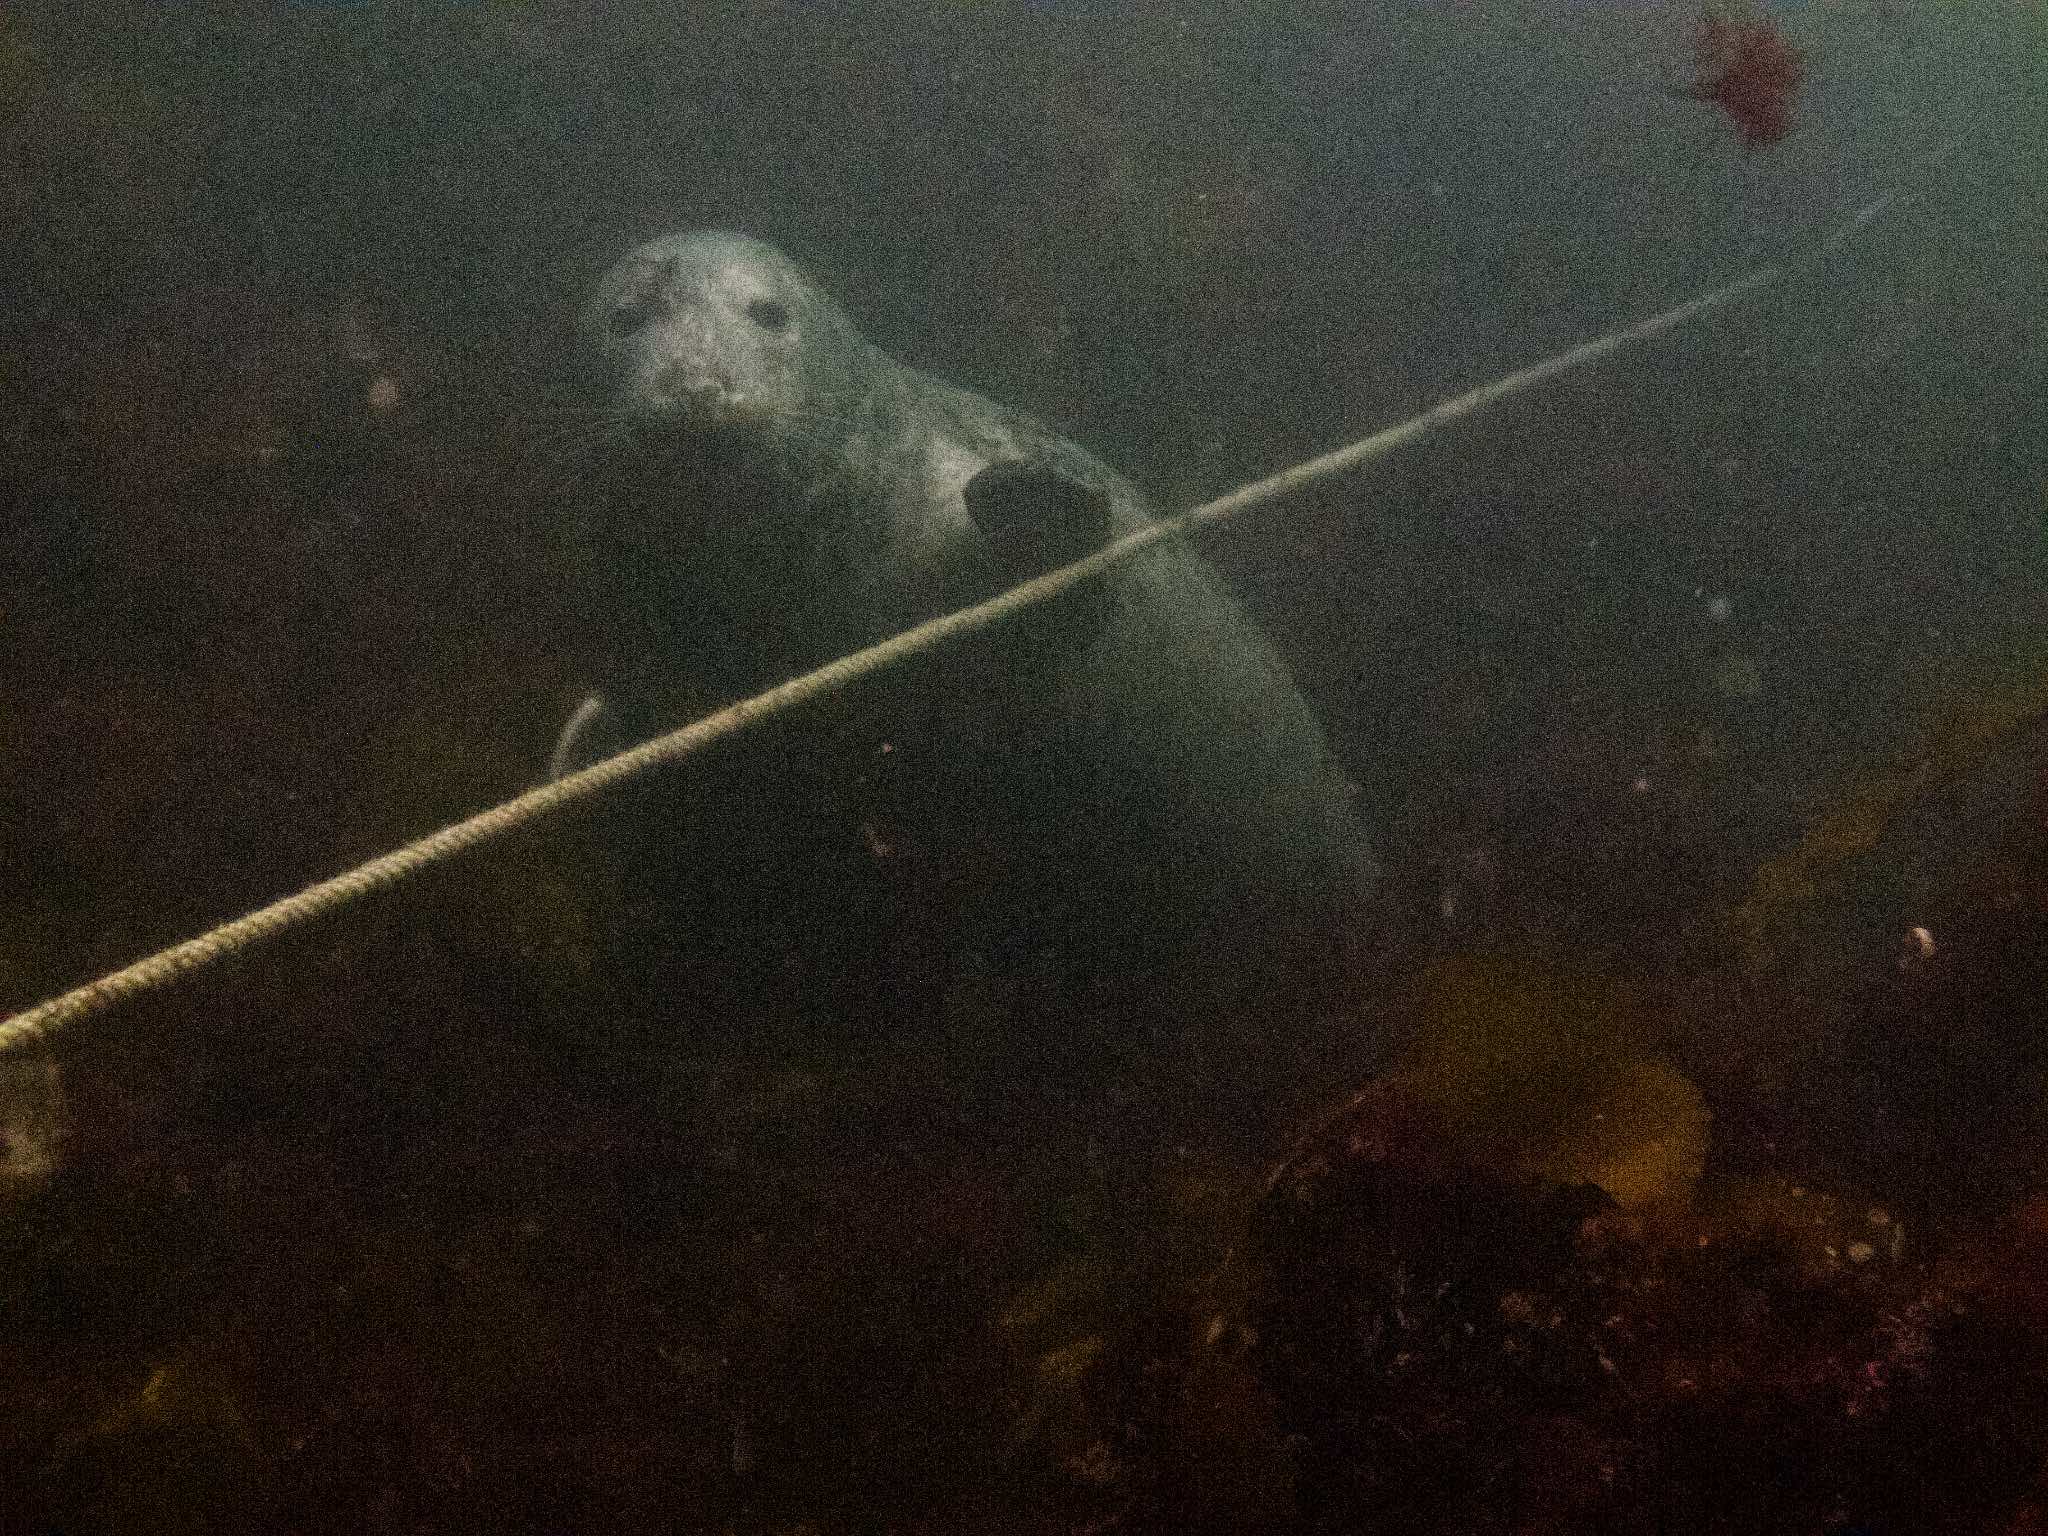 Seal by the lobster line